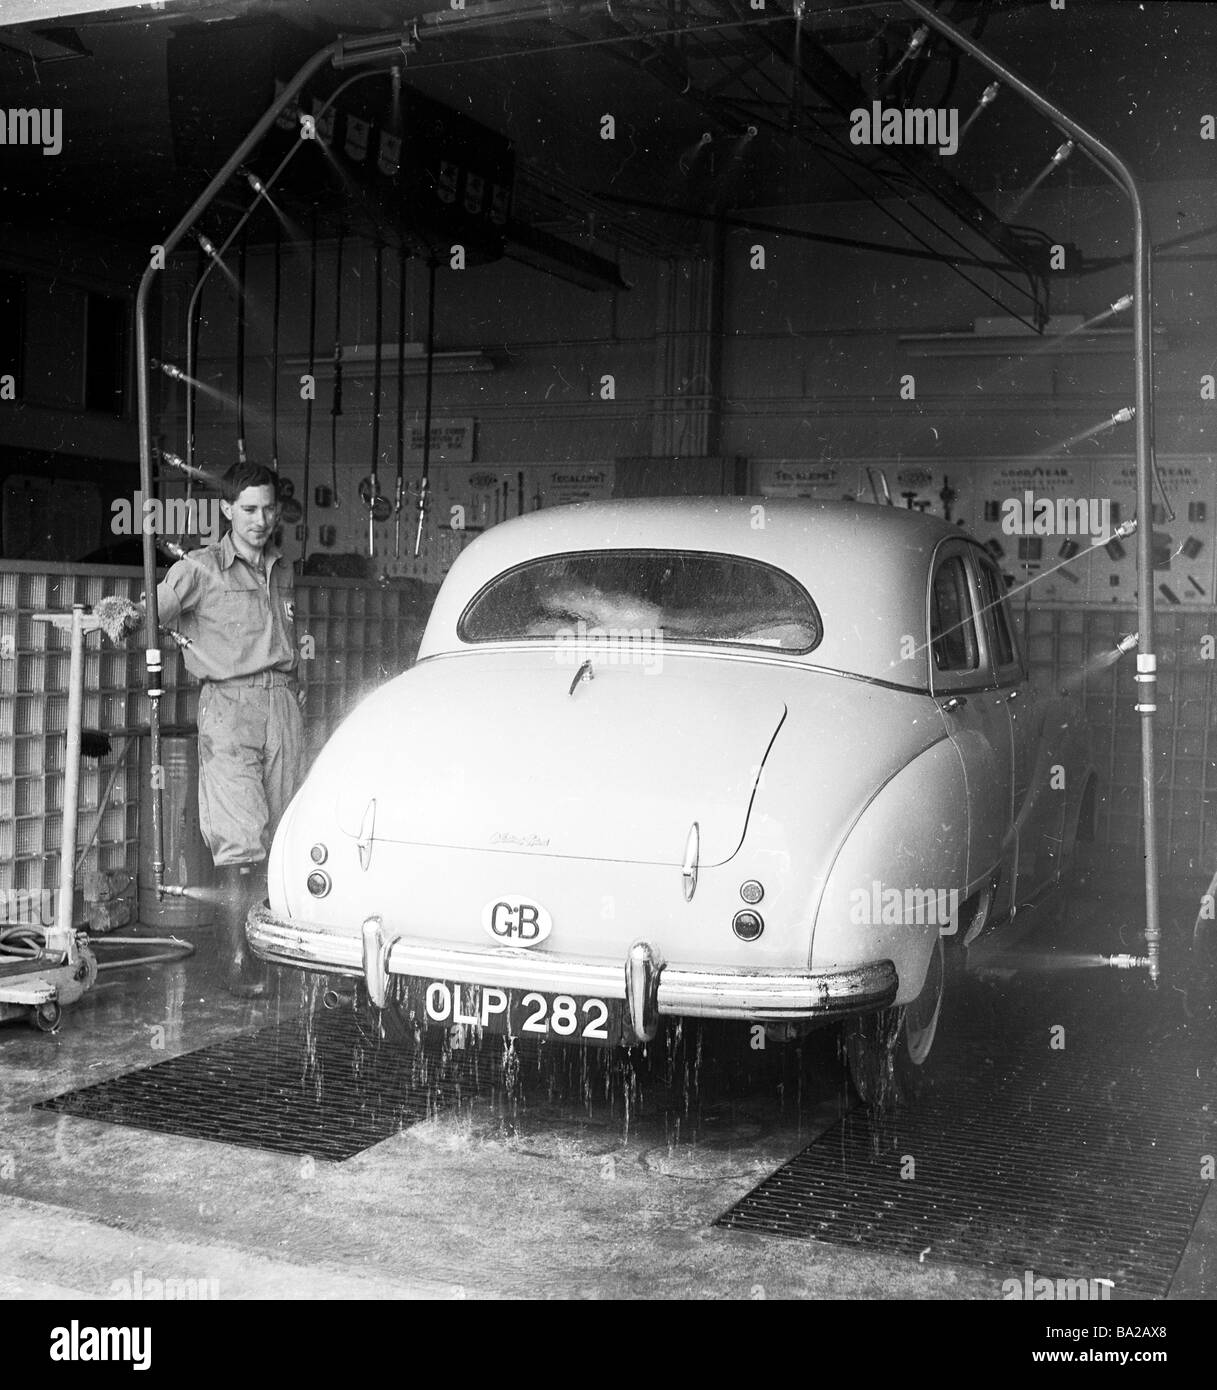 1950s, car wash, a male attendant overseeing an Austin car of the era being washed by a number of jets on a pipe at a  service station, England, UK. Stock Photo